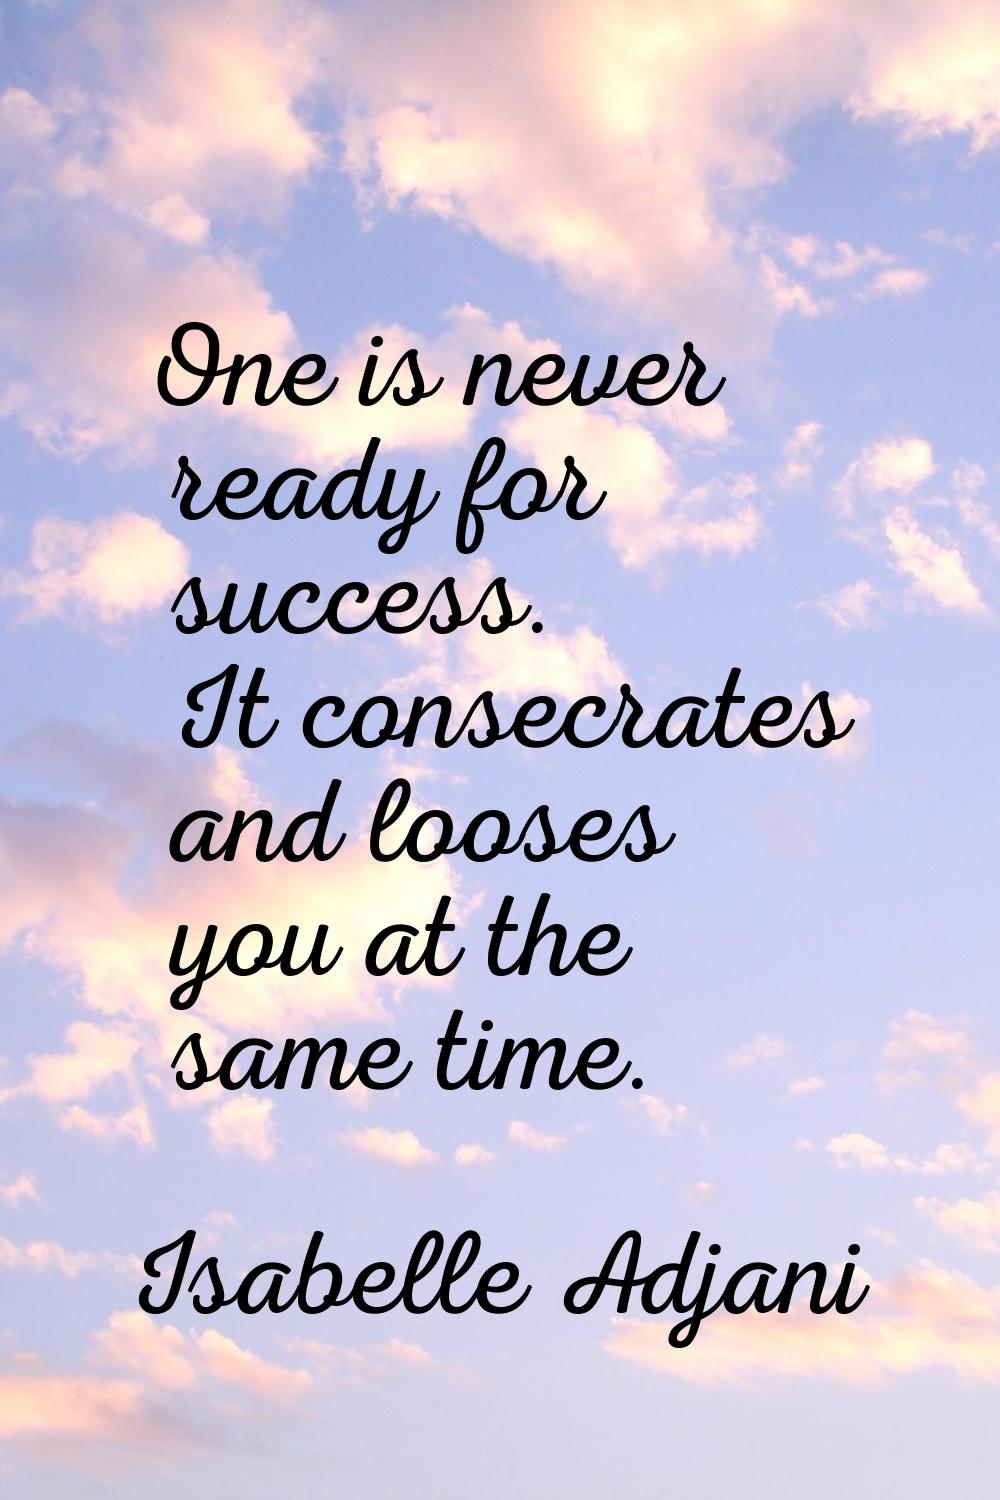 One is never ready for success. It consecrates and looses you at the same time.